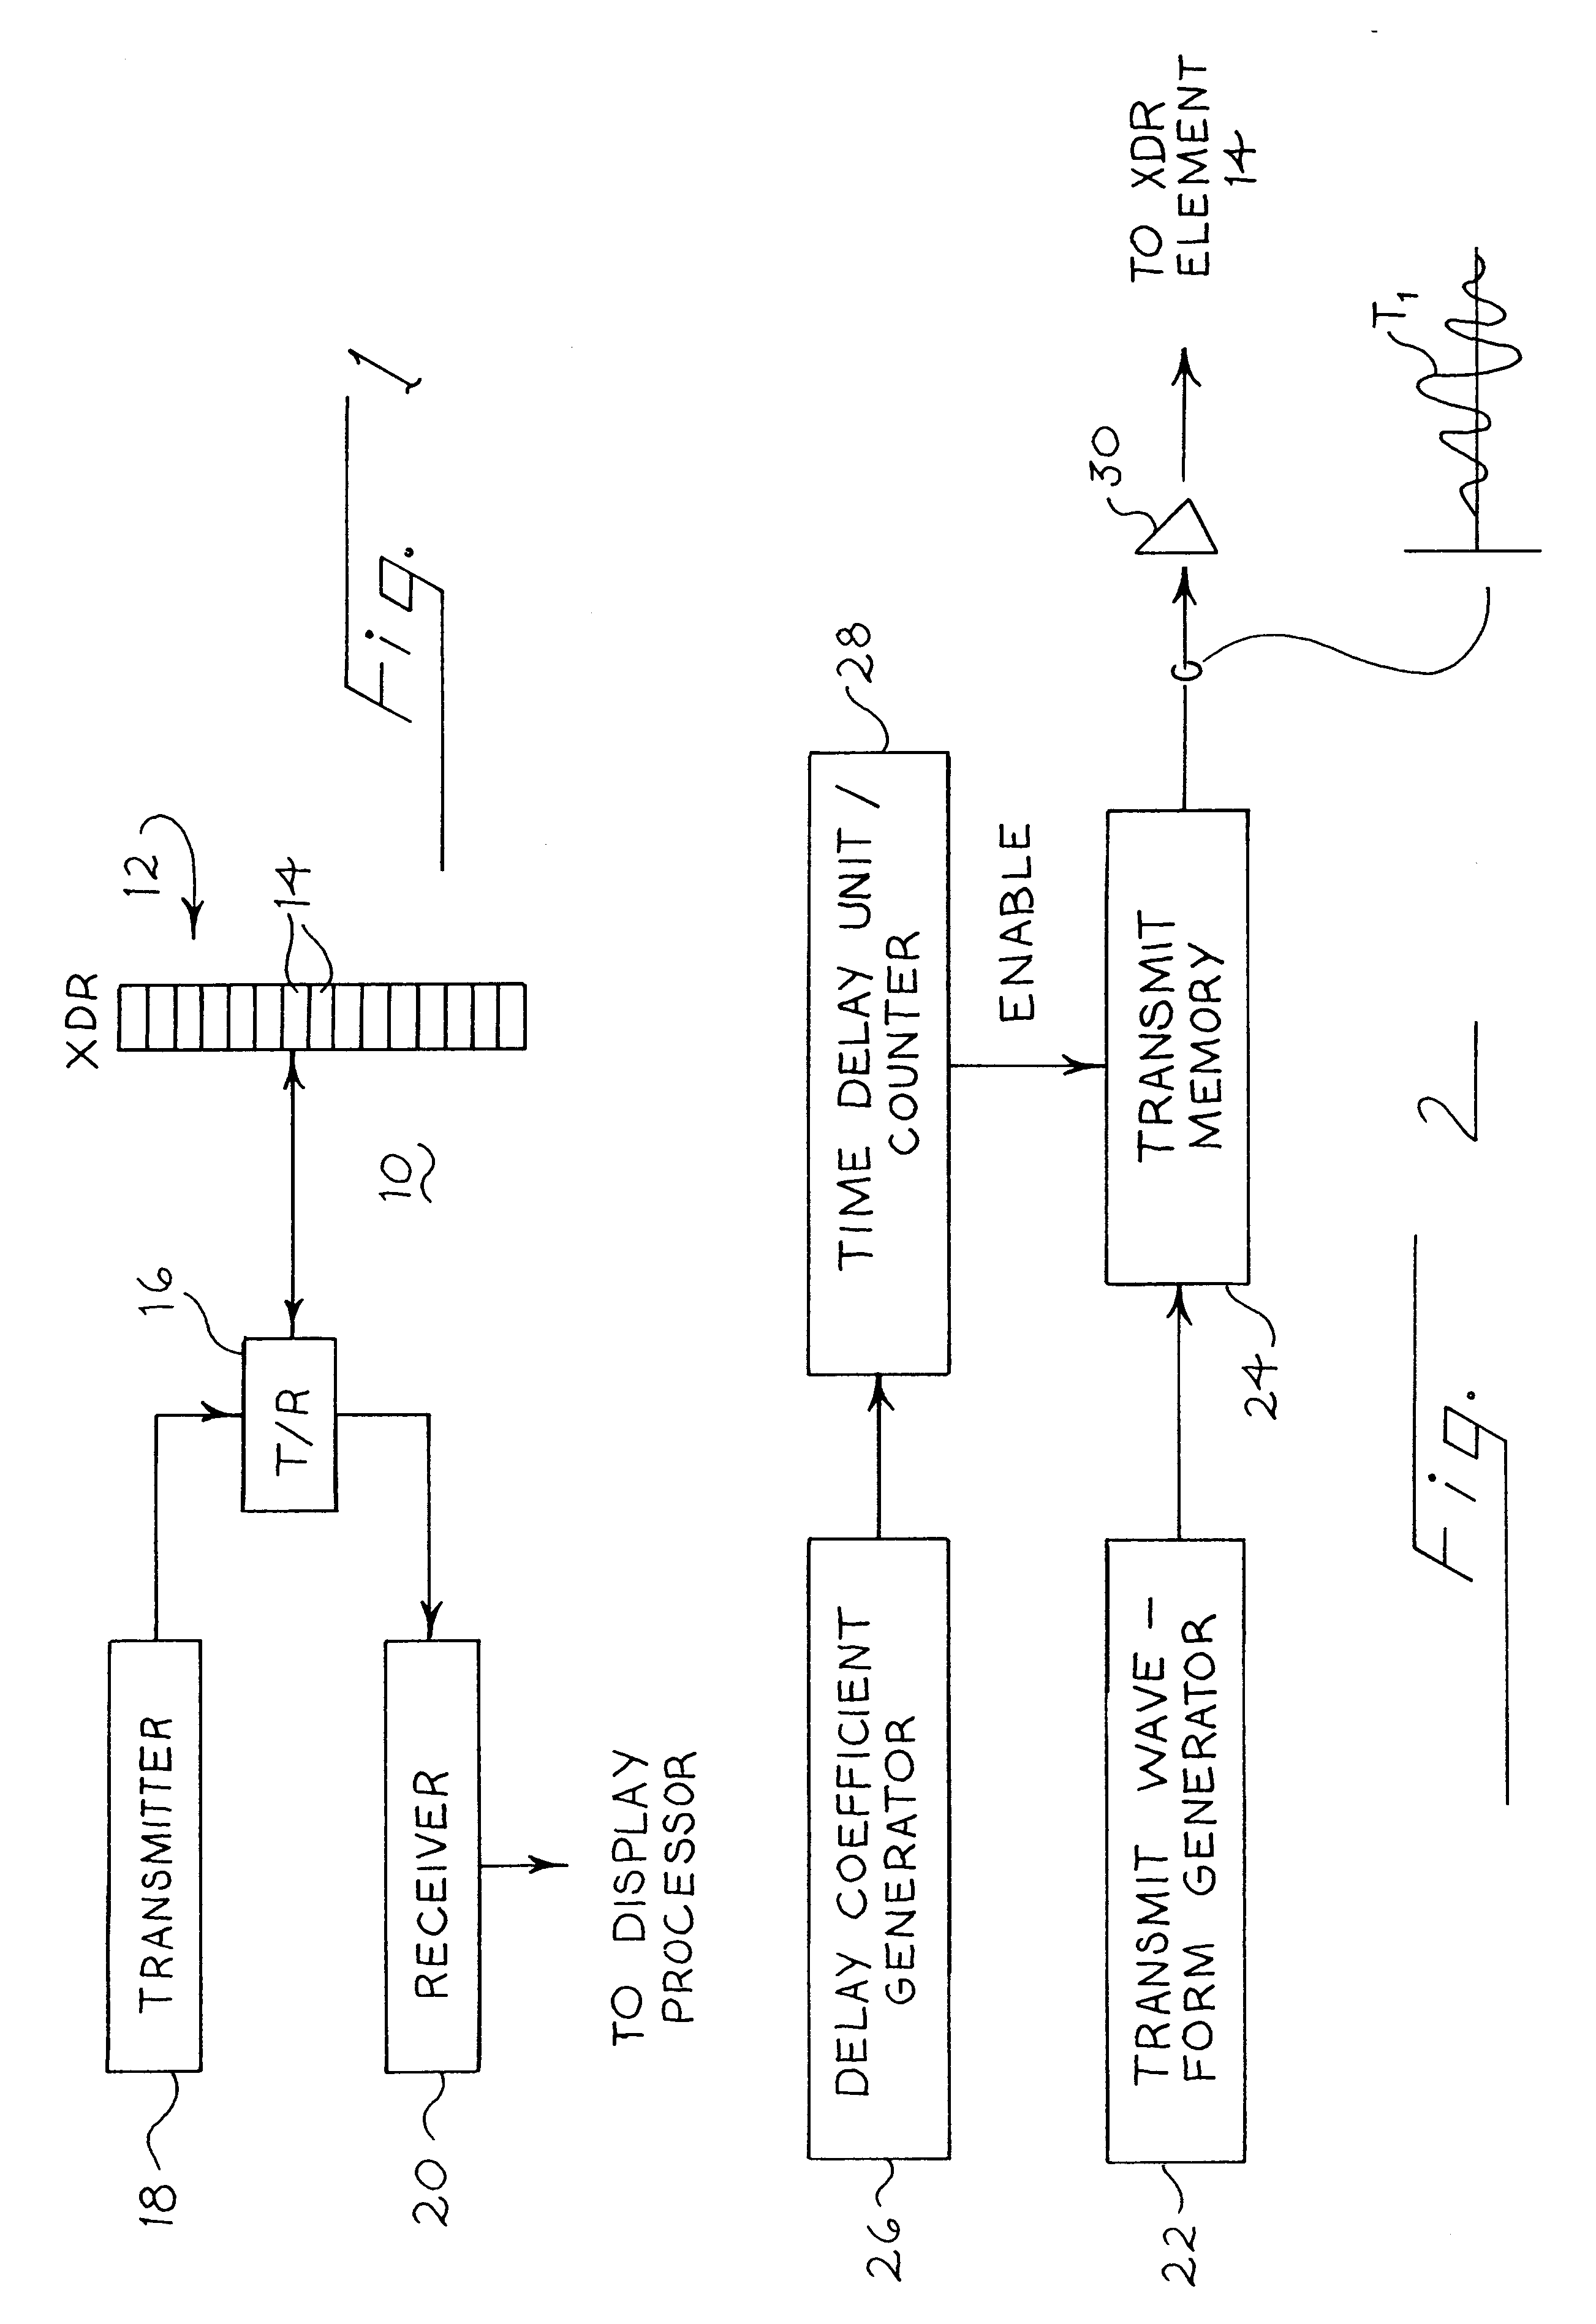 Medical ultrasound imaging system with composite delay profile